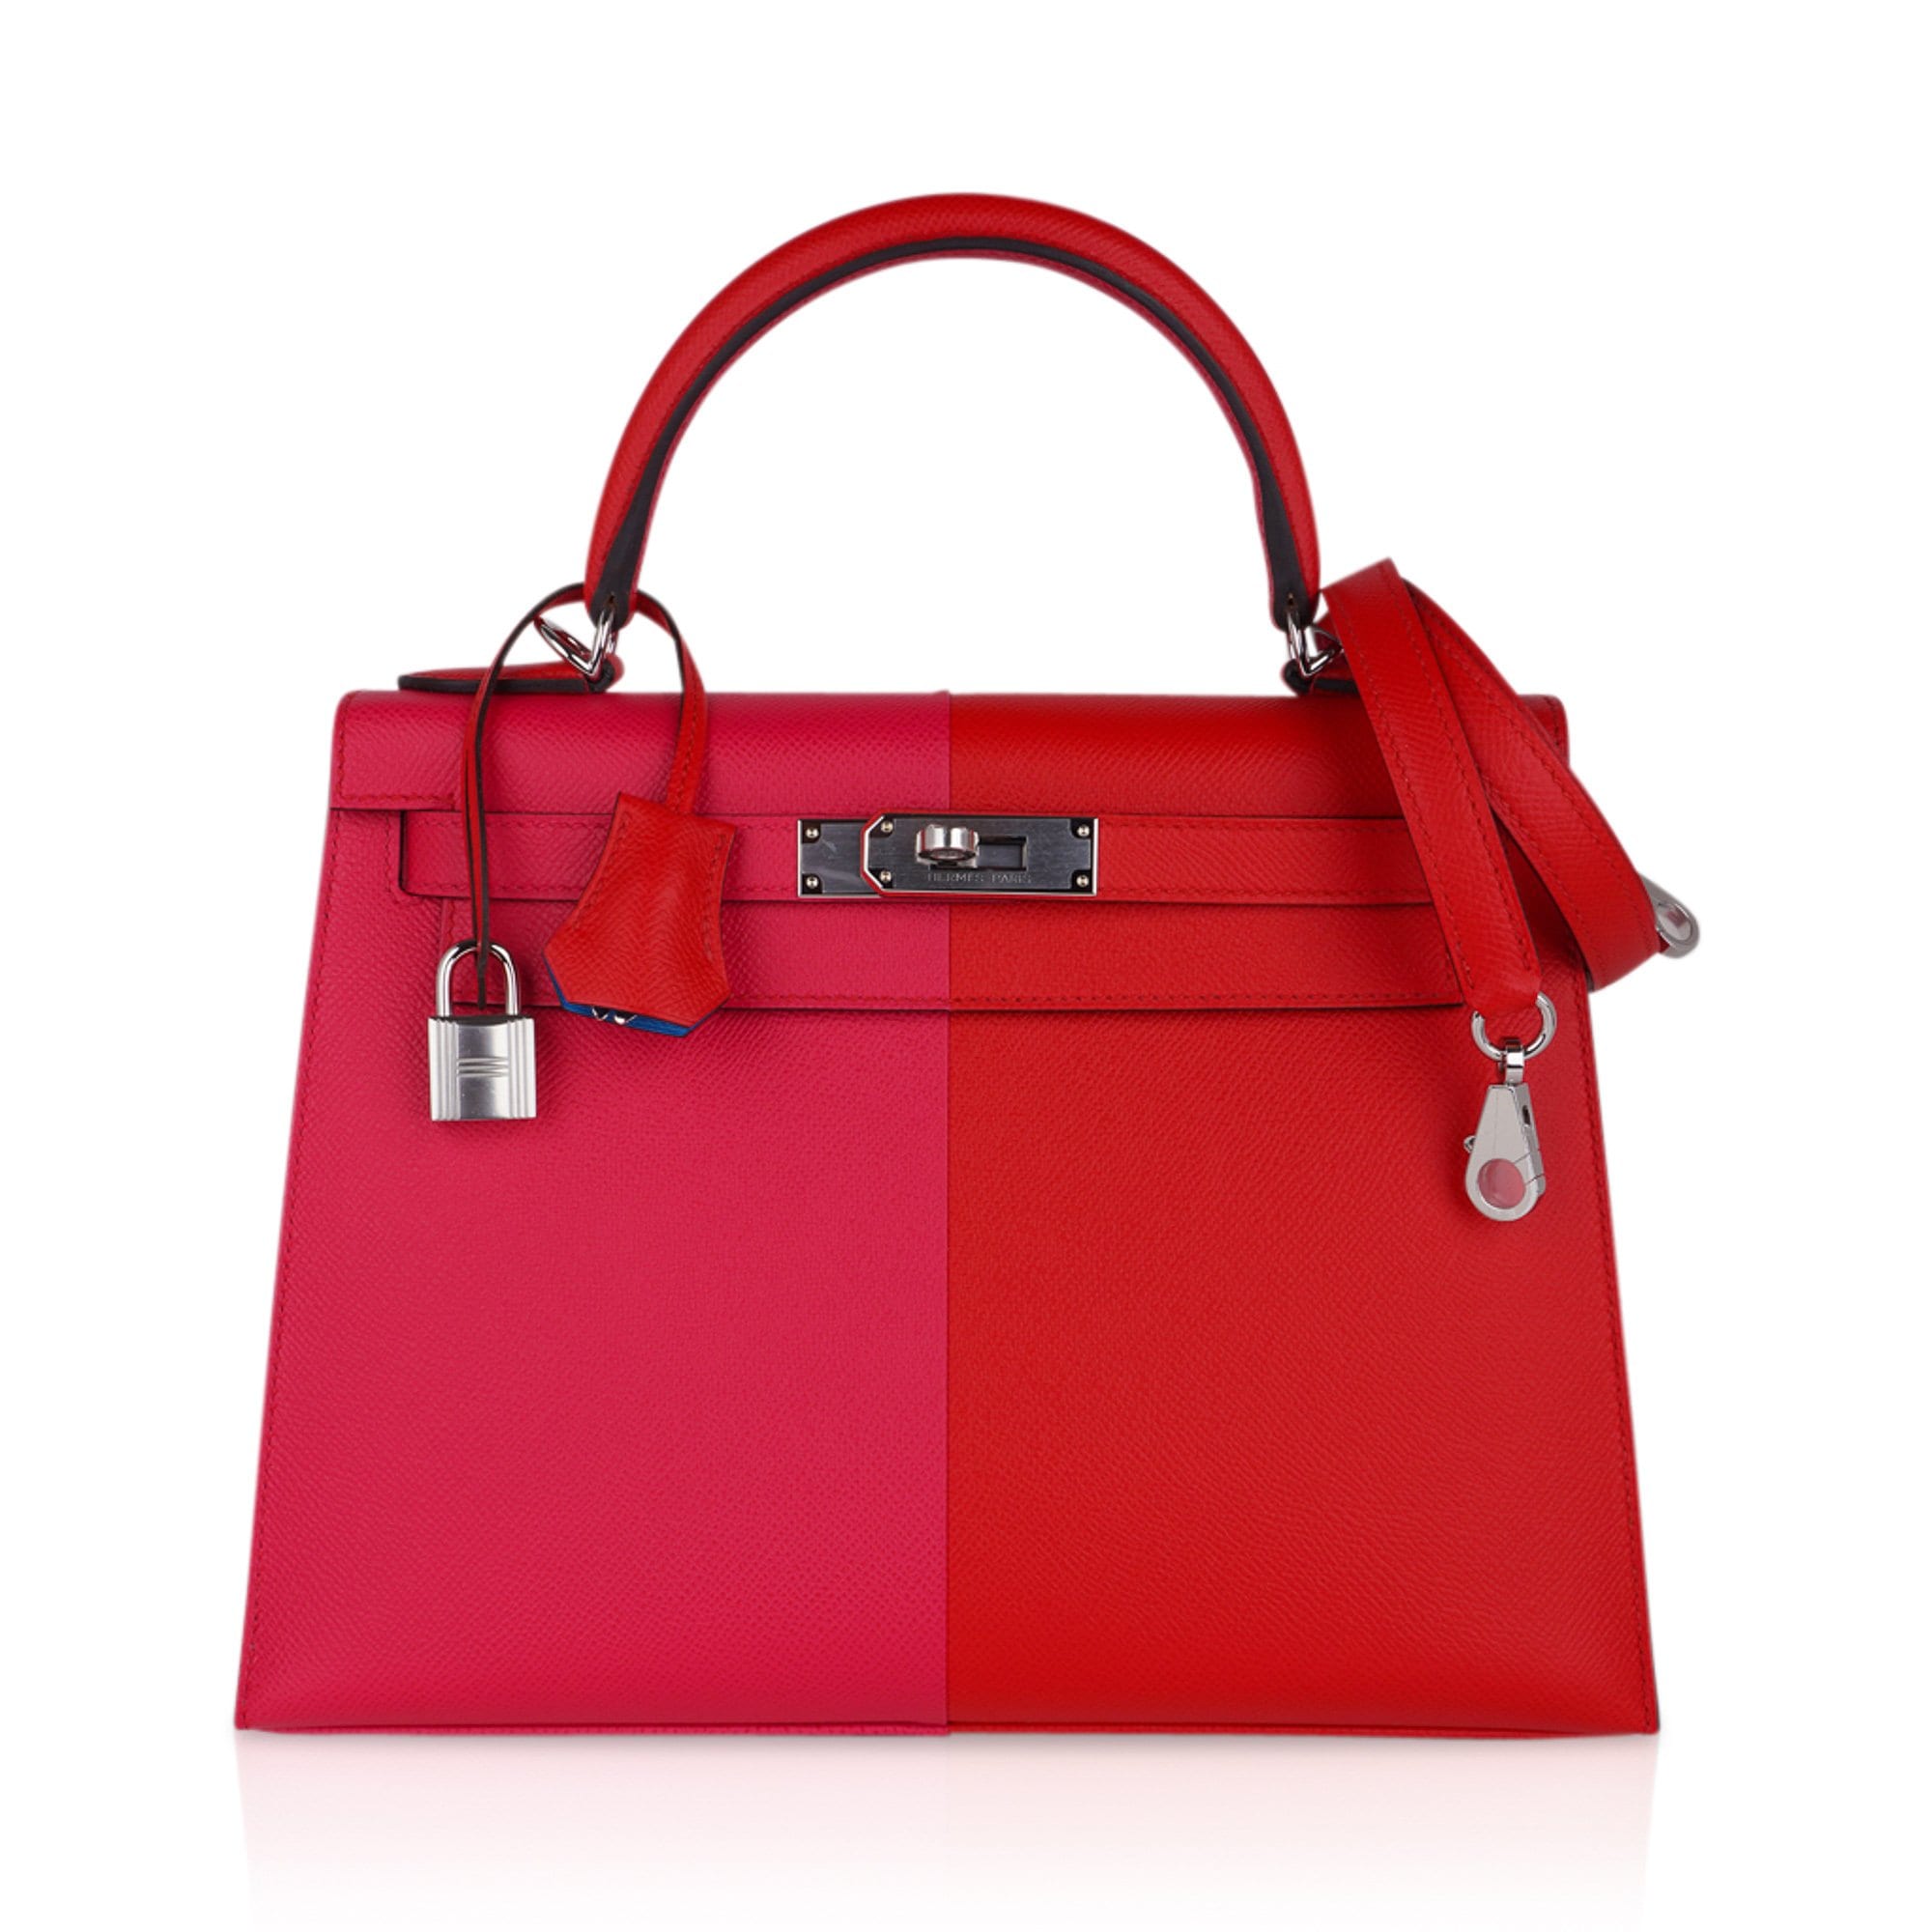 Hermes Kelly 28 Review + What Fits Inside 